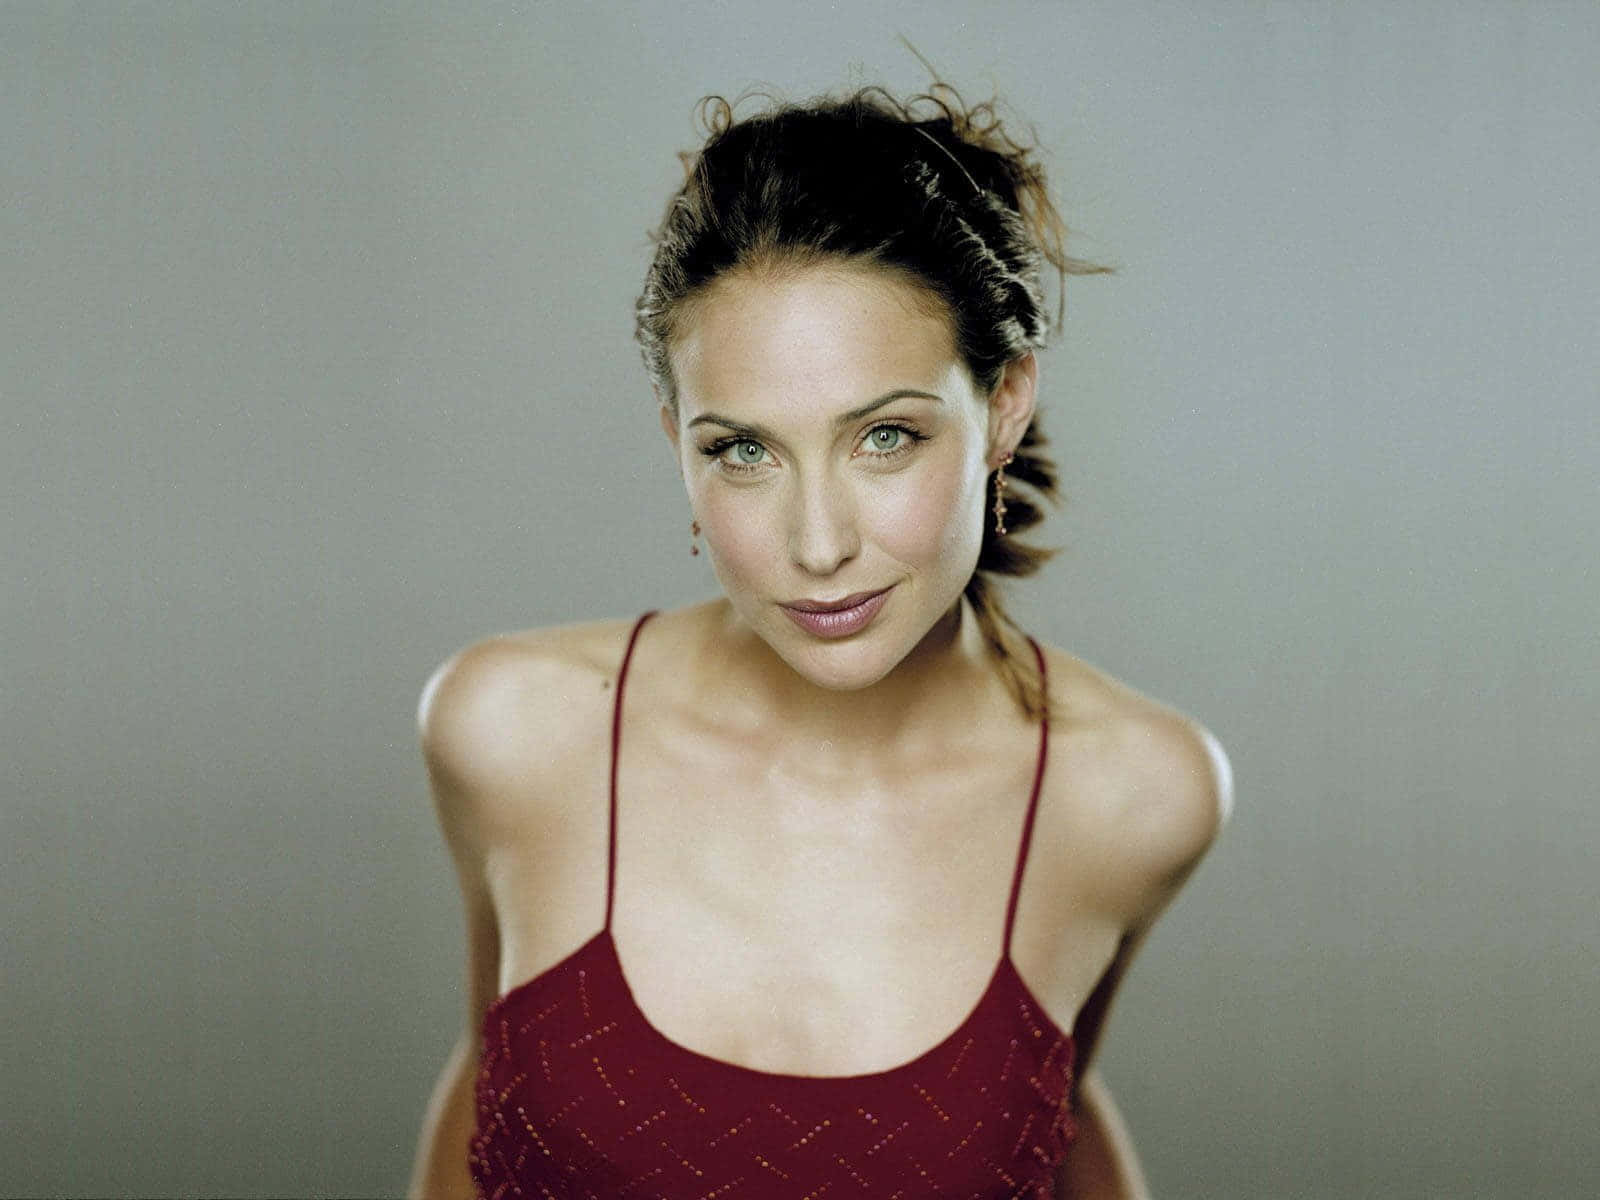 Elegant Claire Forlani Posing in a Stunning Dress Wallpaper